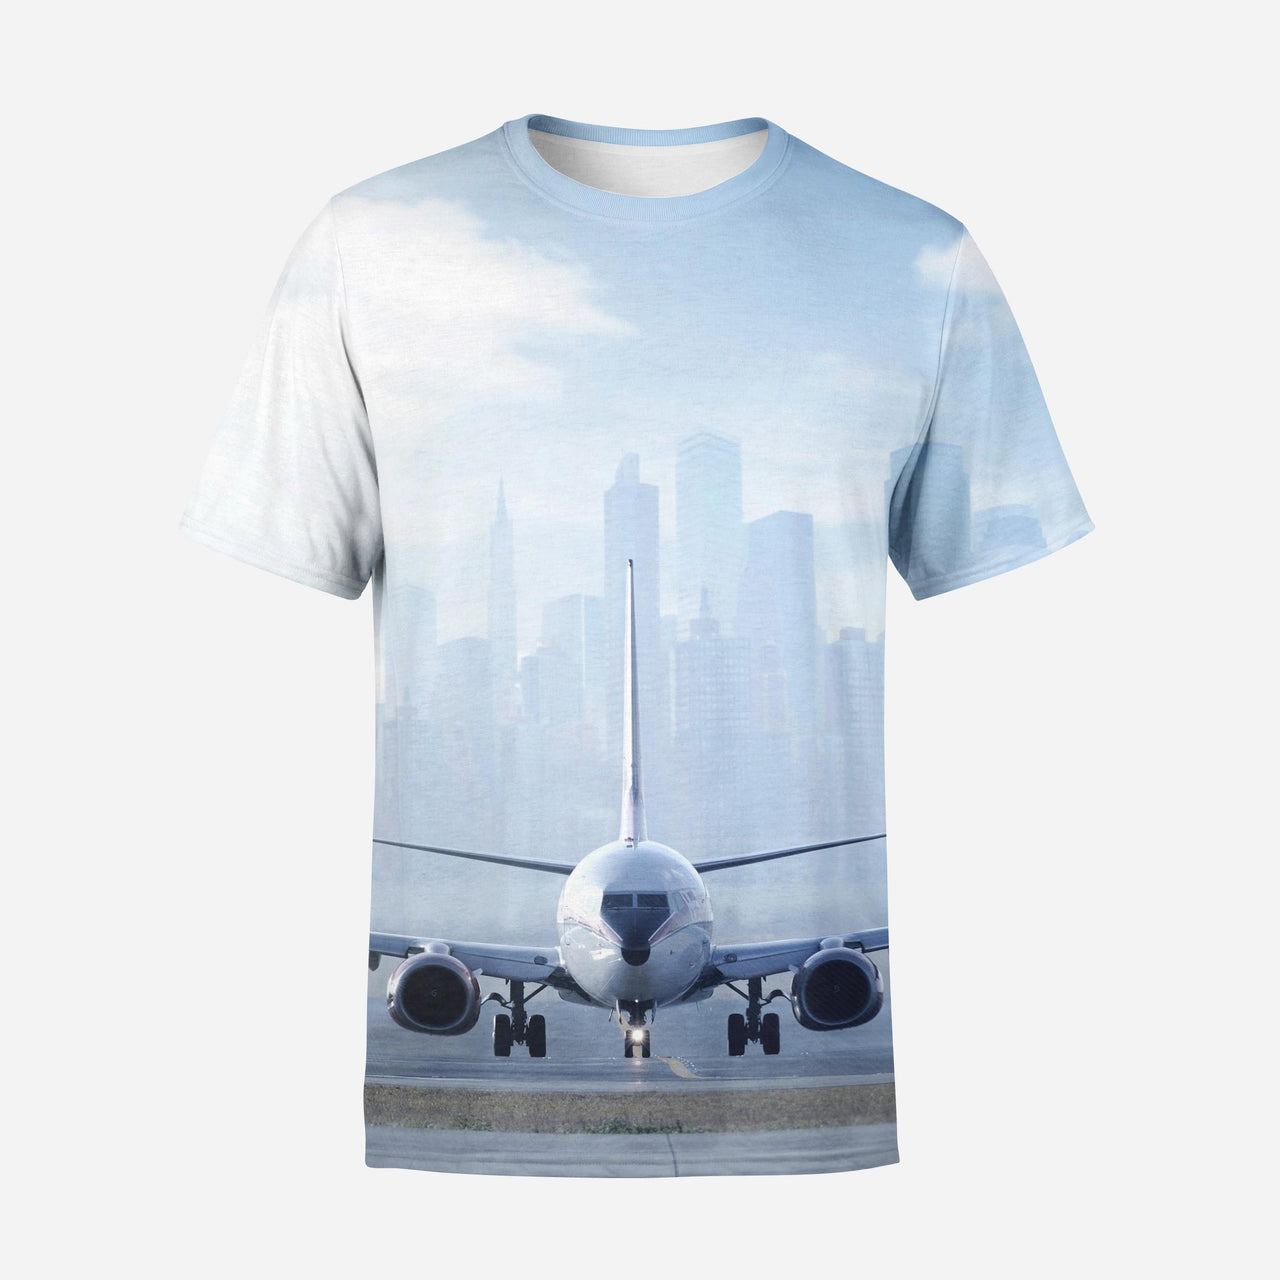 Boeing 737 & City View Behind Printed 3D T-Shirts